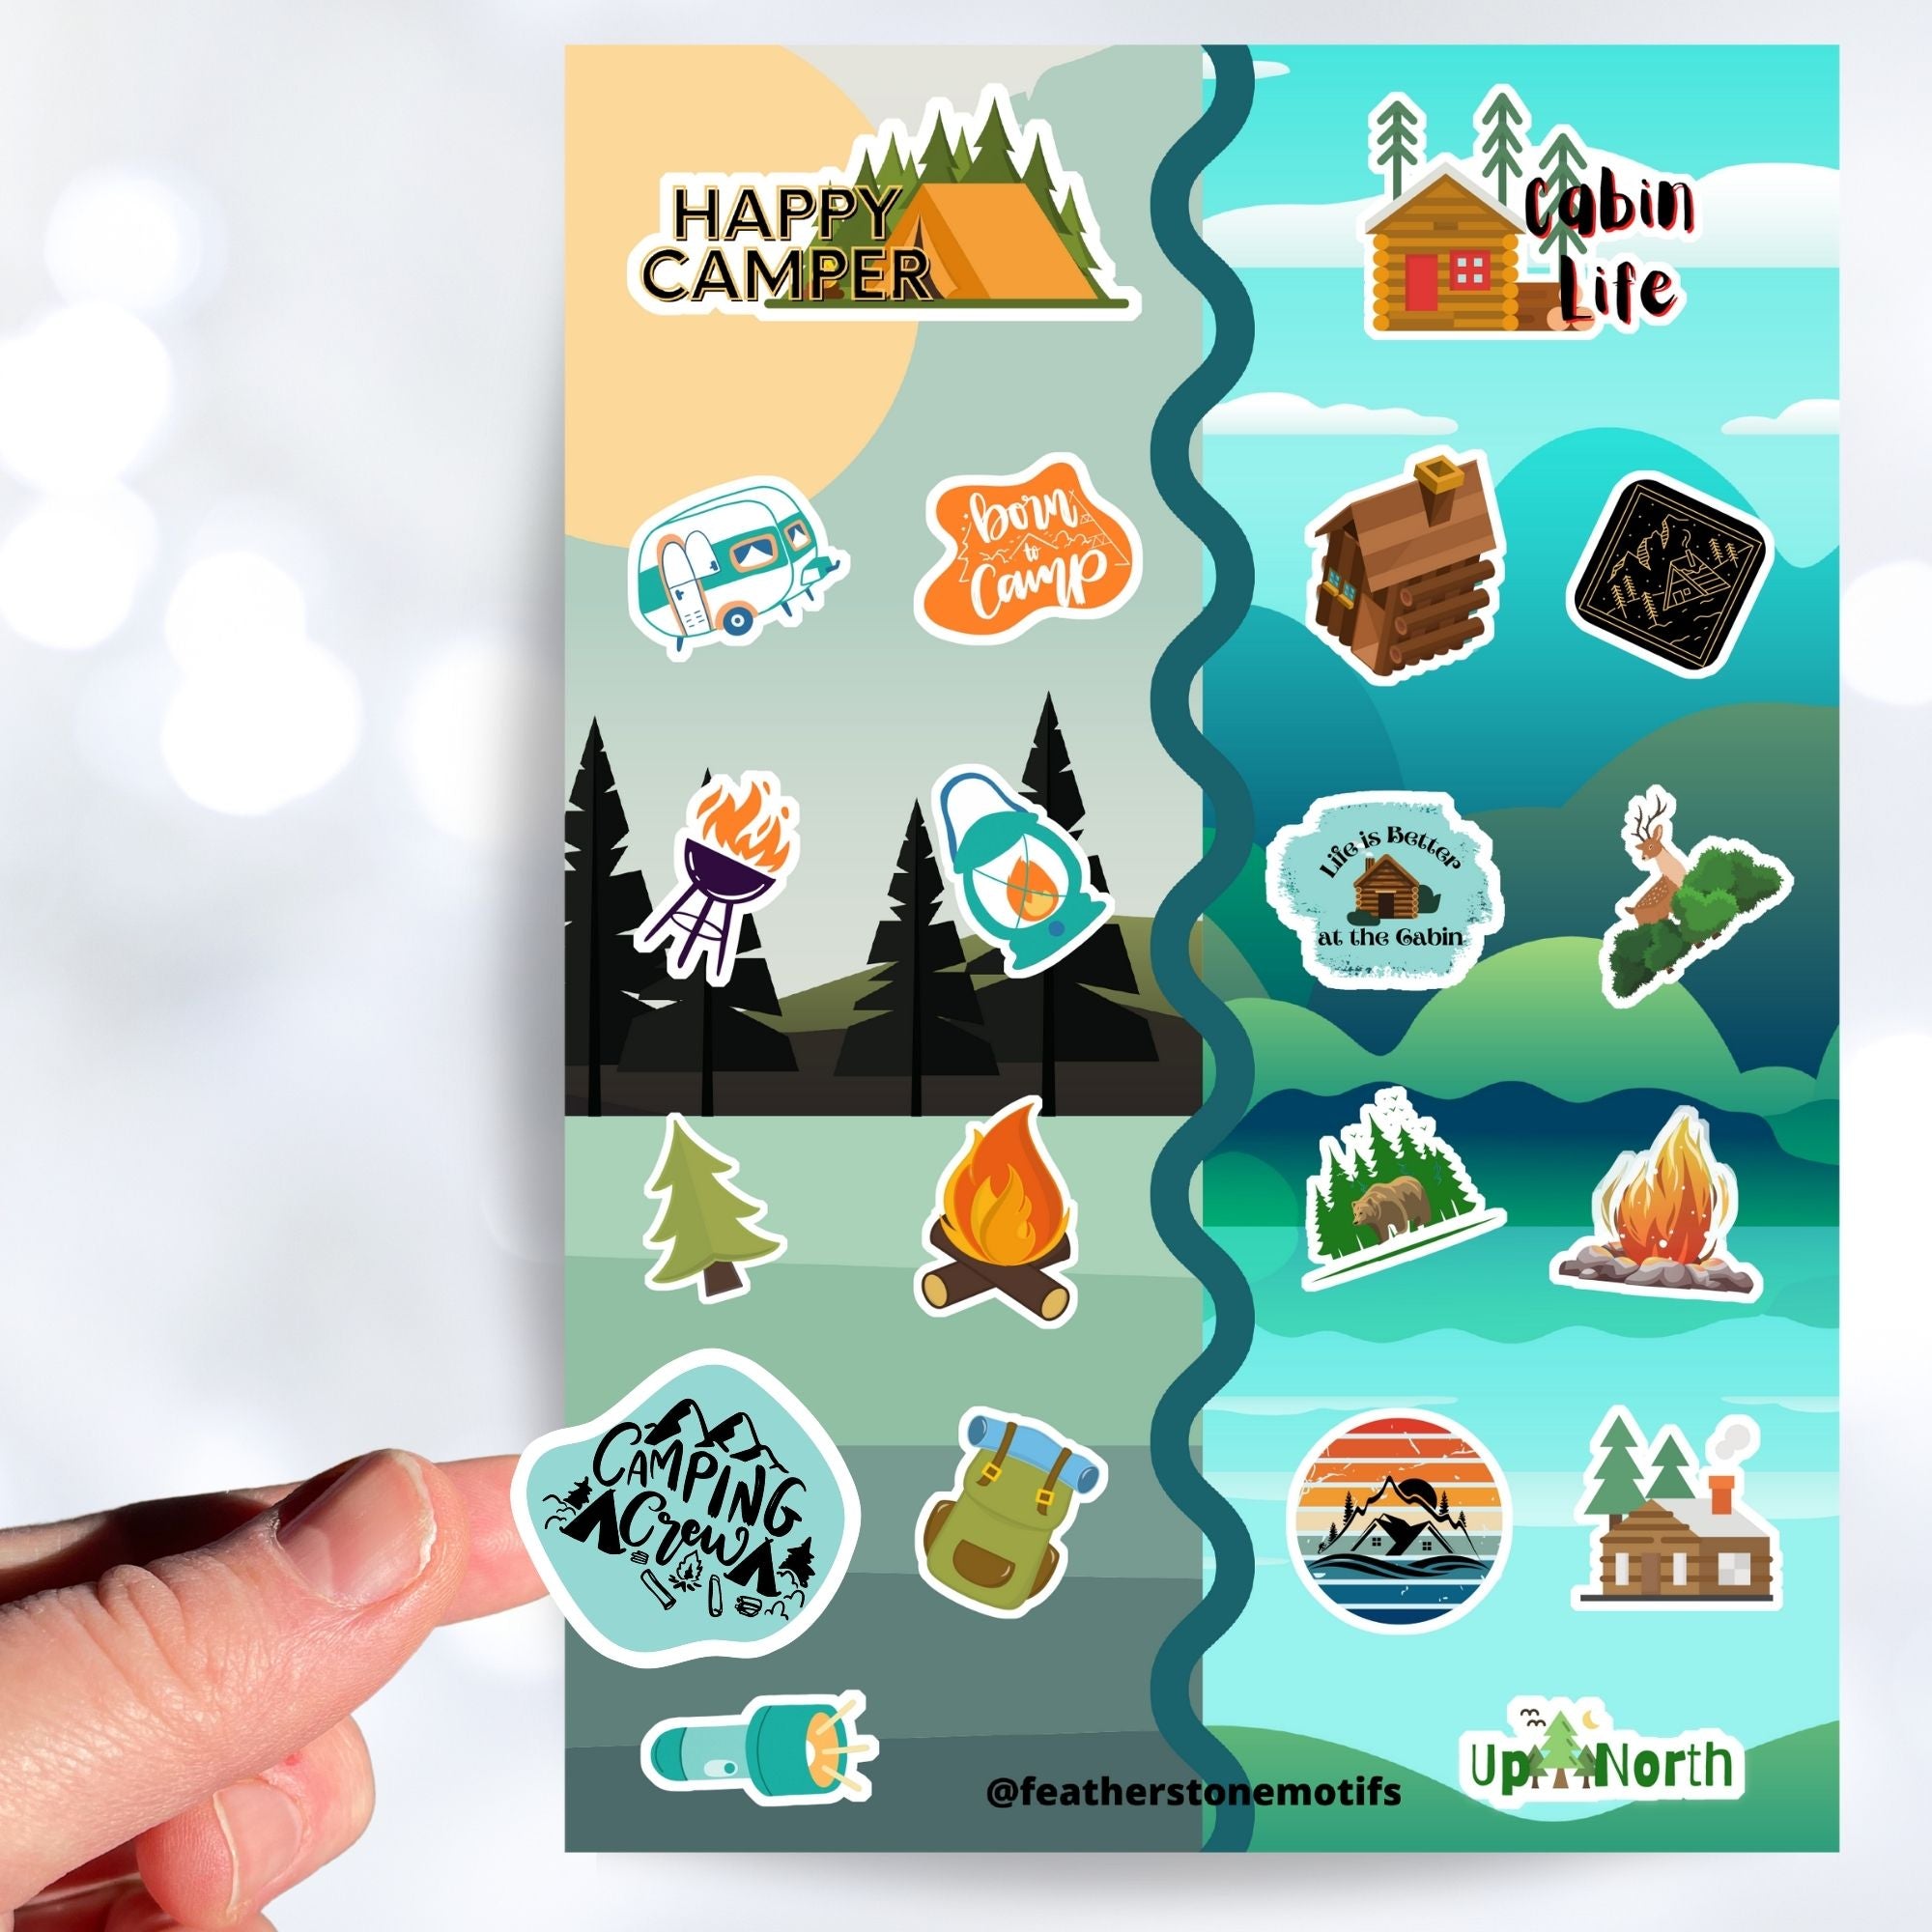 Get away to the woods, mountains, or beach with this sticker sheet! This sticker sheet has sticker images for camping in a tent or camper, or in a cabin or cottage. This image shows a hand holding a sticker reading "Camping Crew" above the sticker sheet.